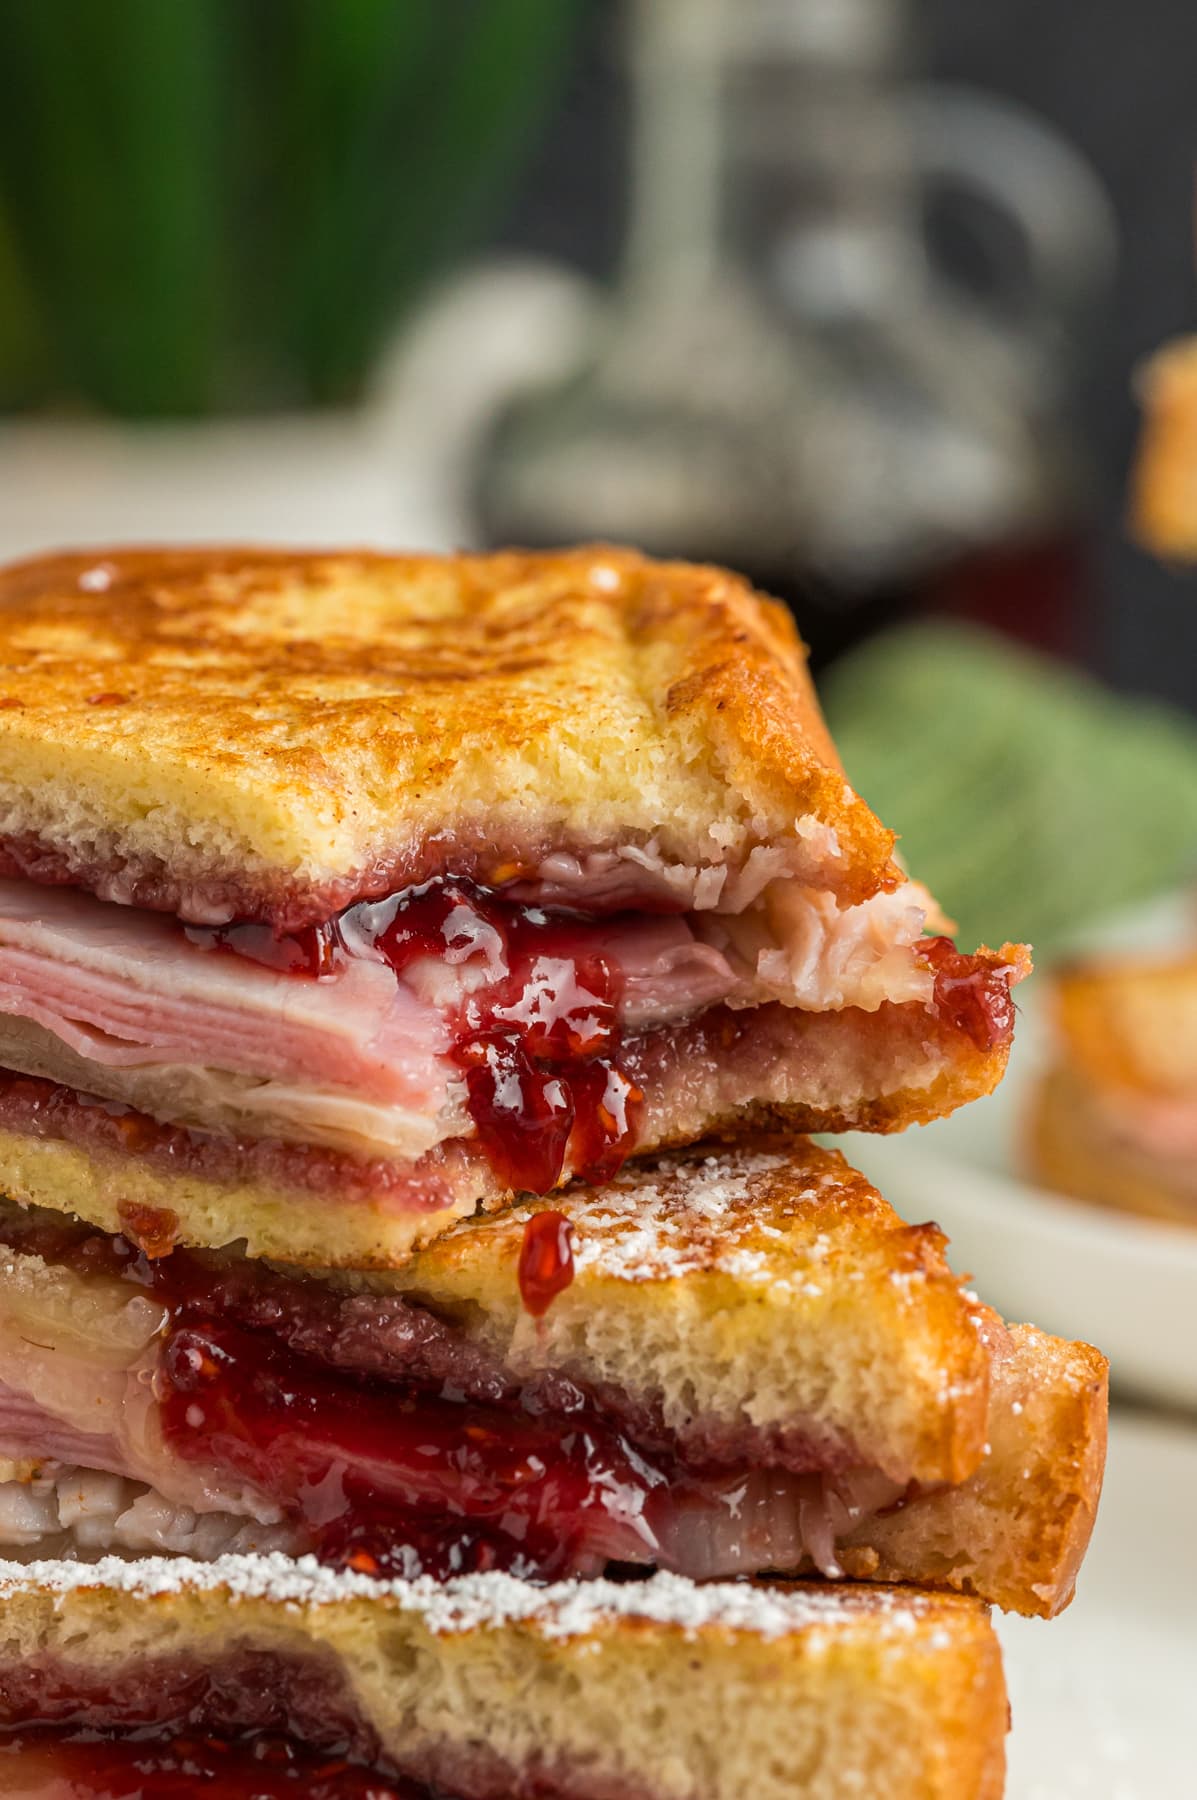 A Monte Cristo sandwich stacked on each other, with a bite missing to show the jam